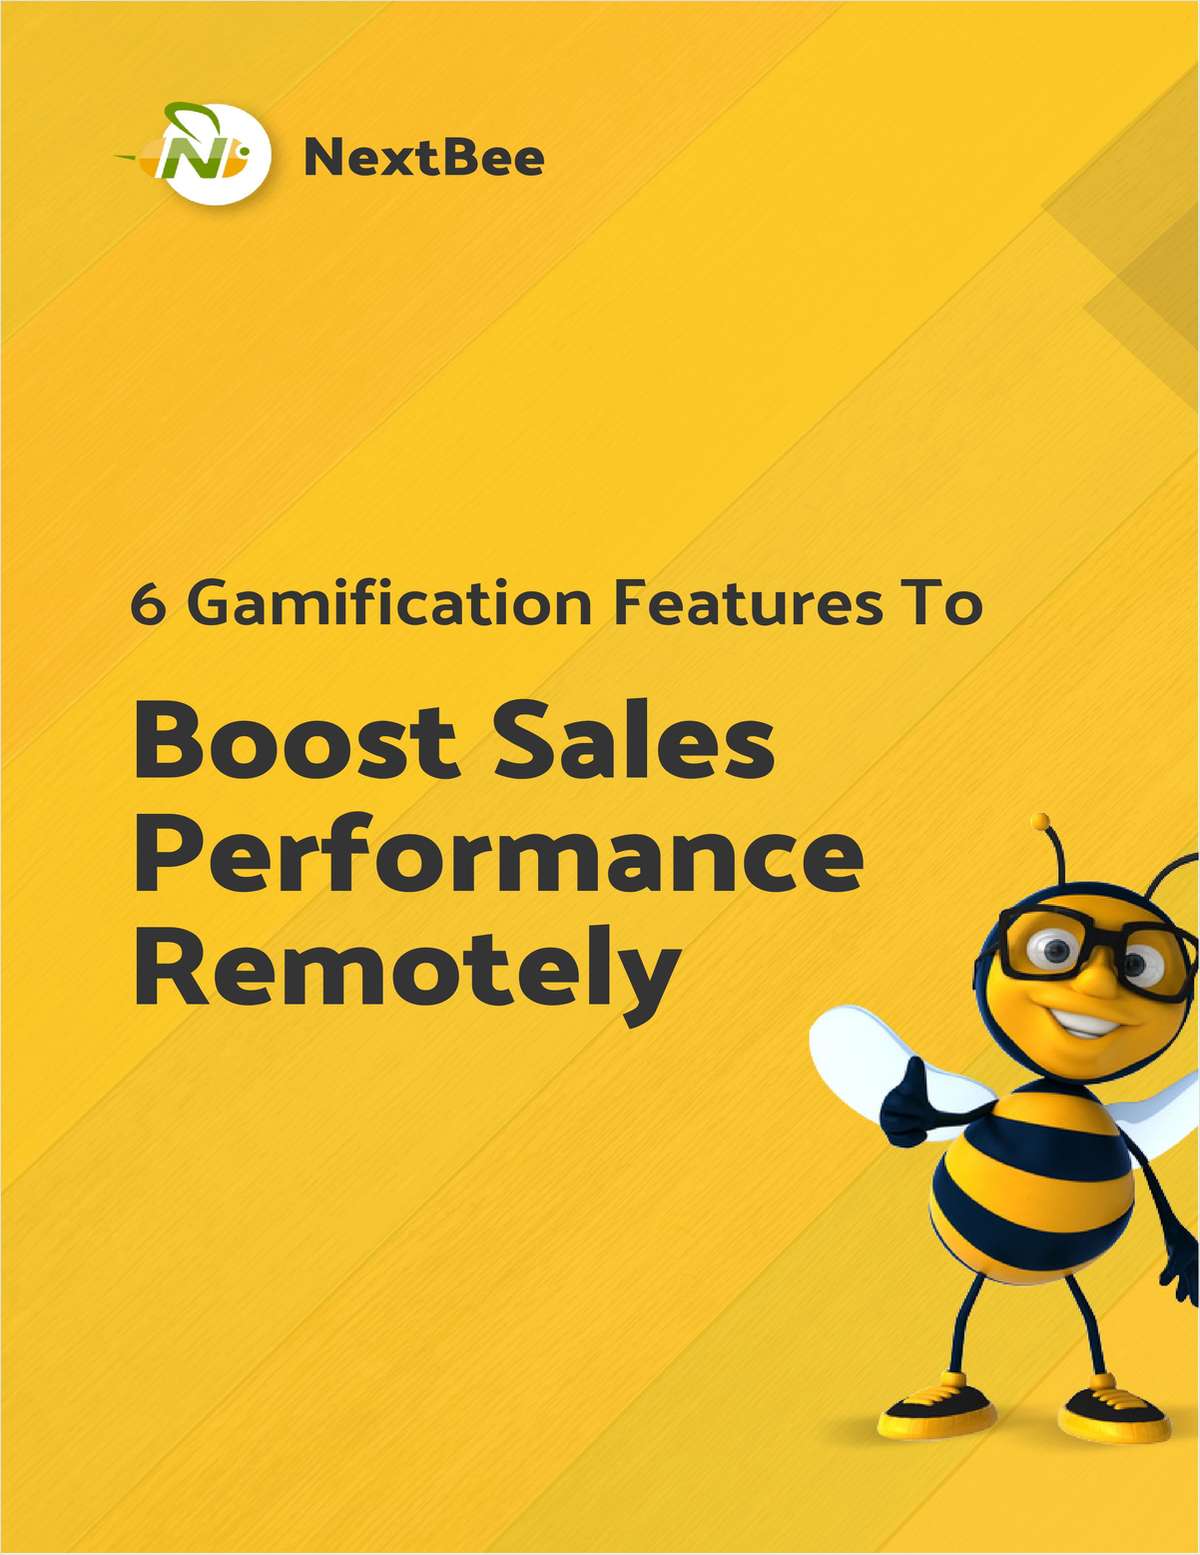 6 Gamification Features to Boost Sales Remotely